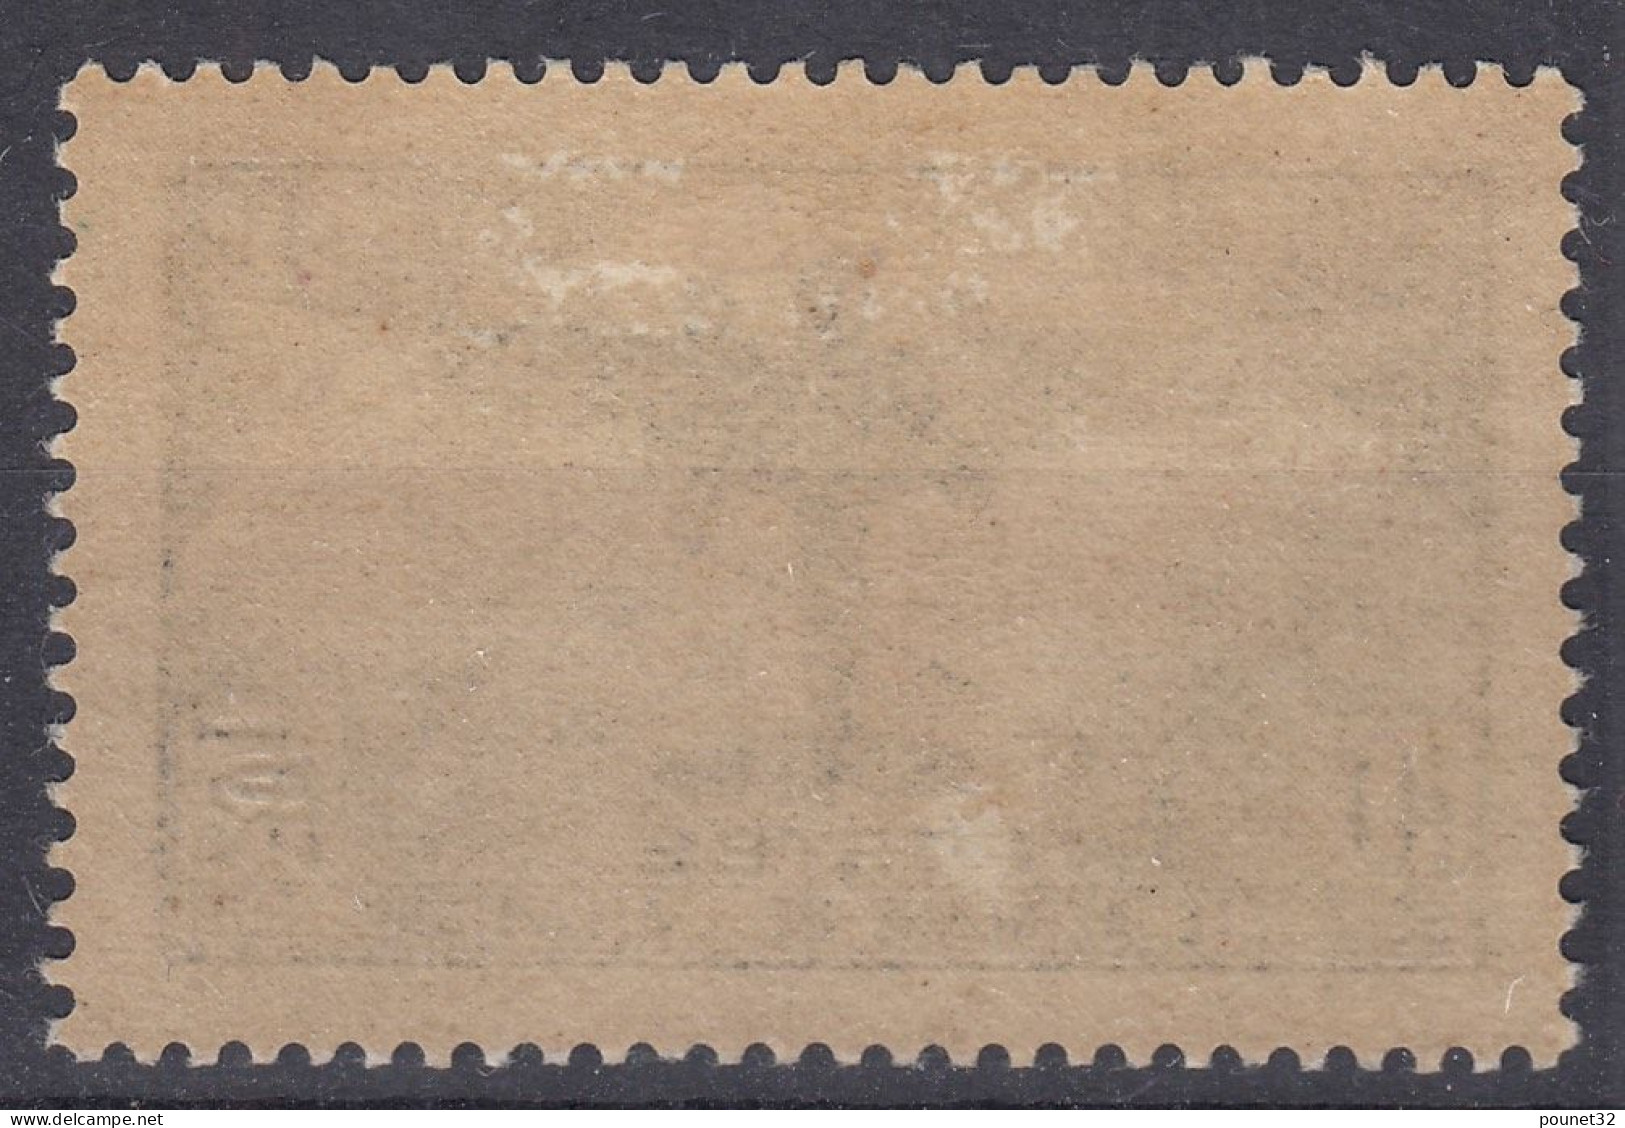 FRANCE CONQUETE ATLANTIQUE SUD N° 321 NEUF * GOMME TRACE CHARNIERE - COTE 375 € - Unused Stamps